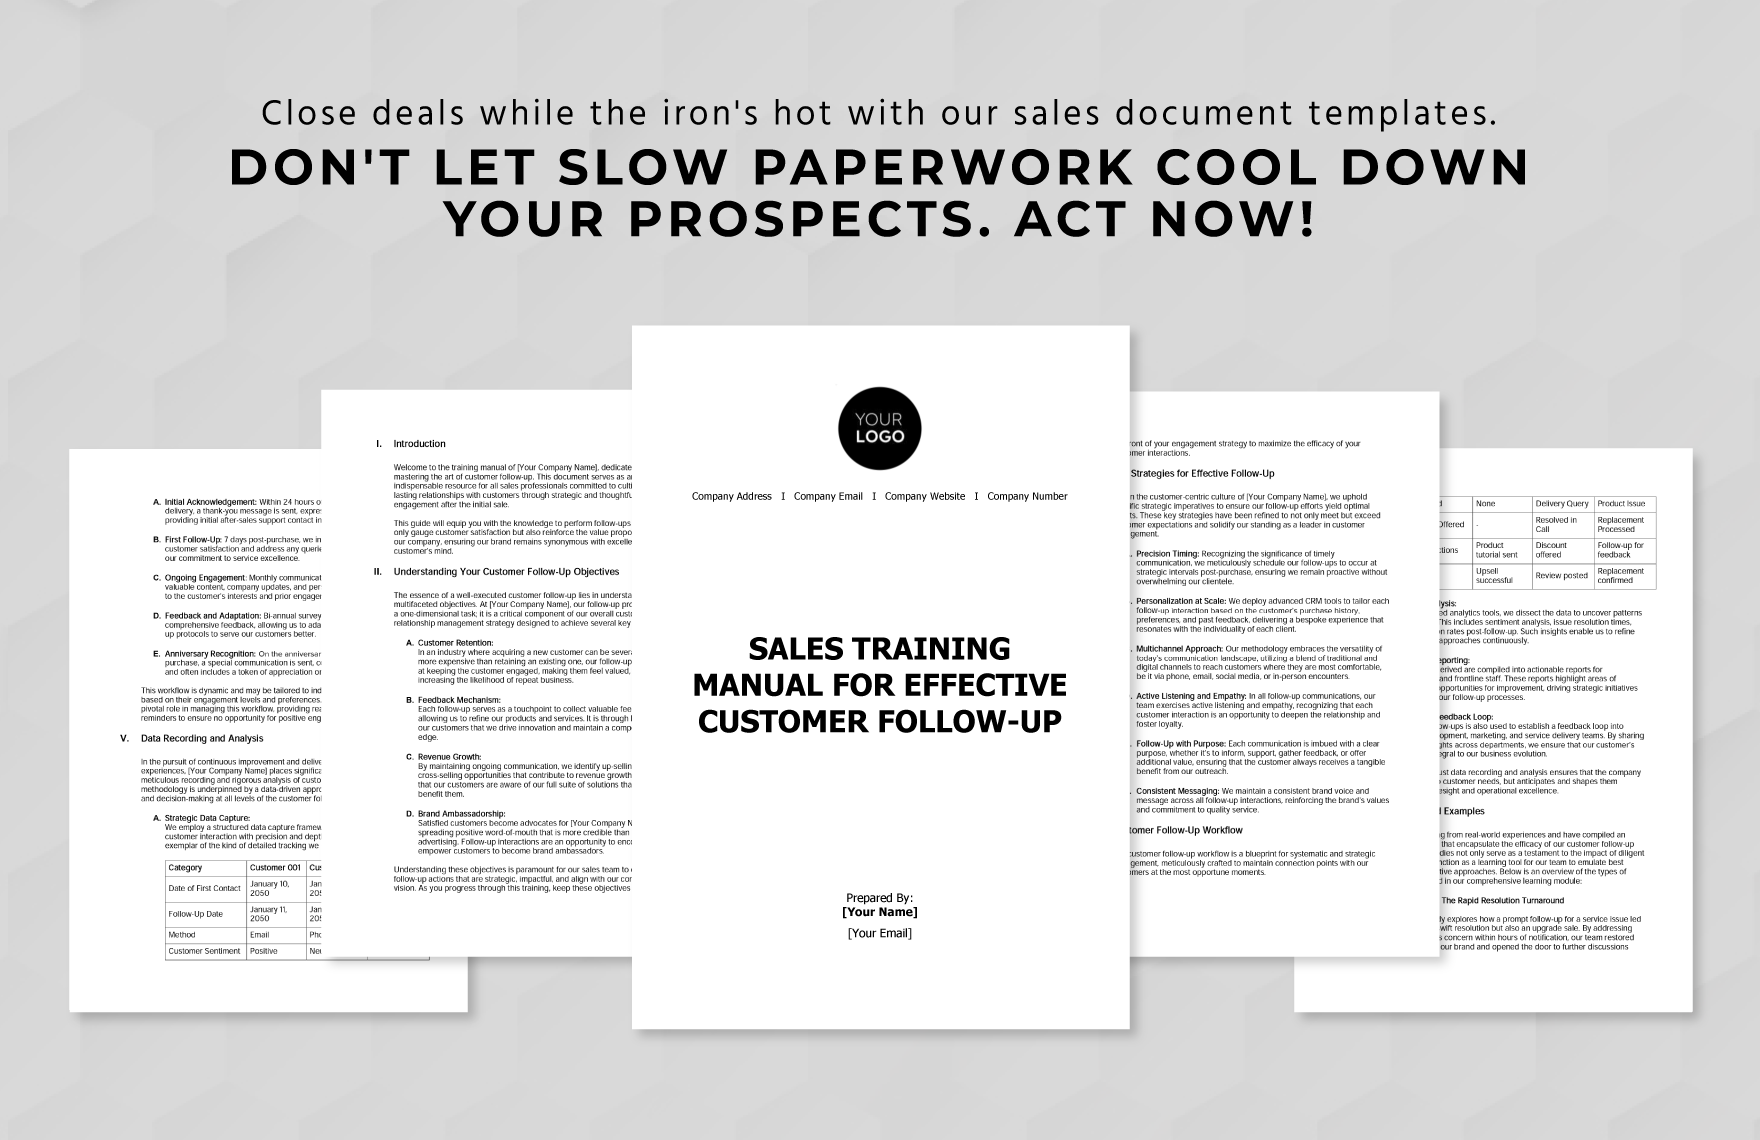 Sales Training Manual for Effective Customer Follow-Up Template